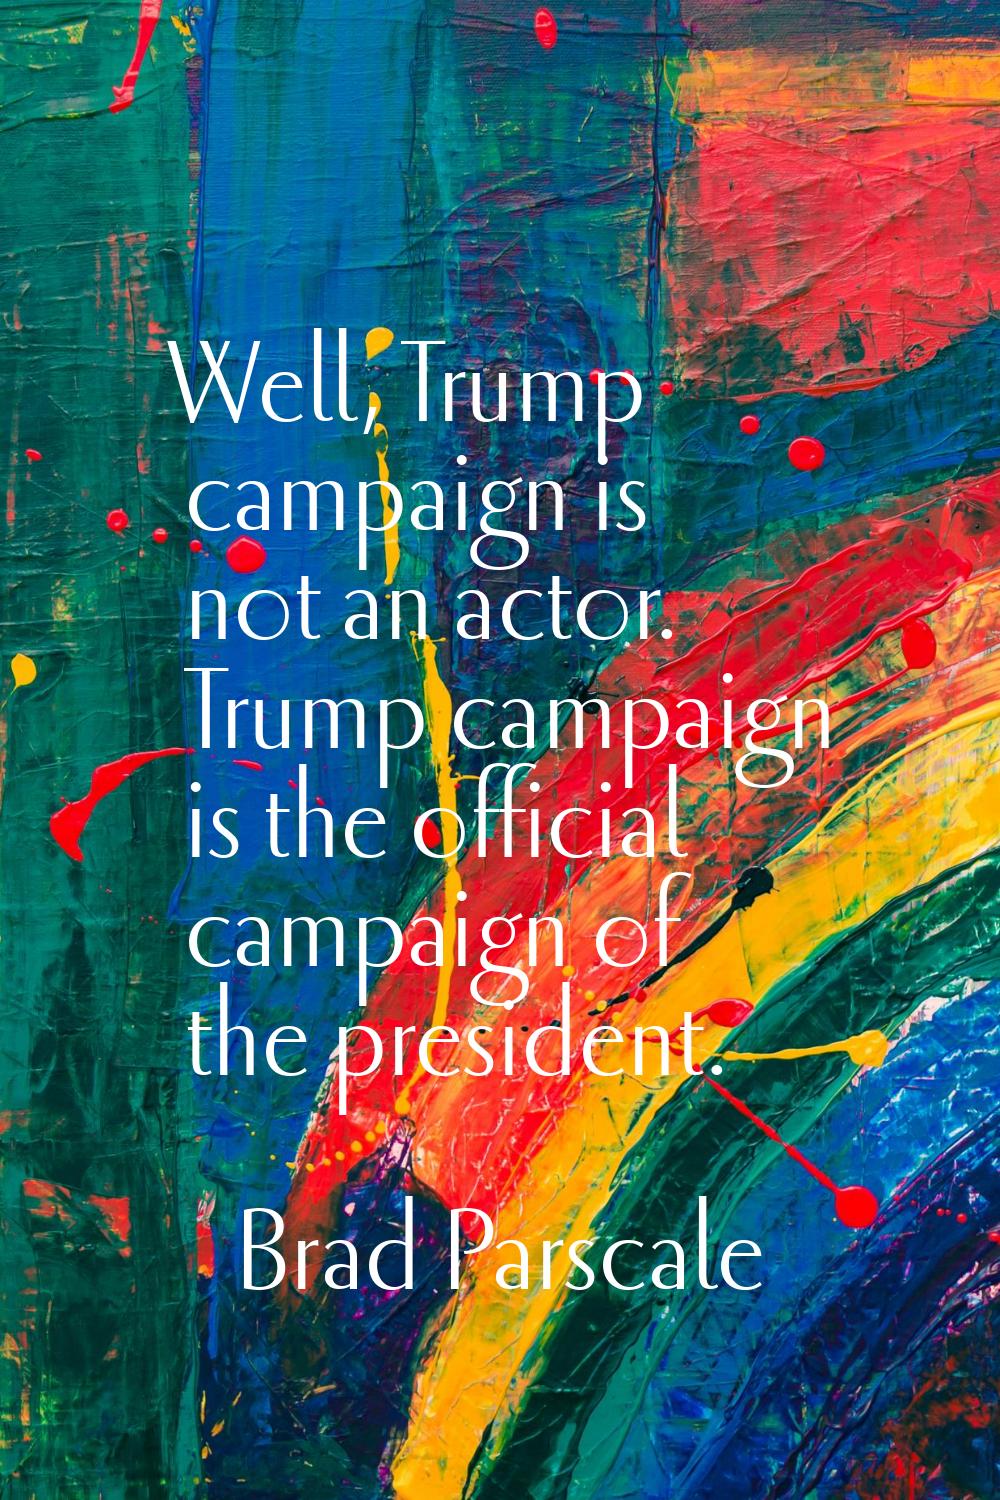 Well, Trump campaign is not an actor. Trump campaign is the official campaign of the president.